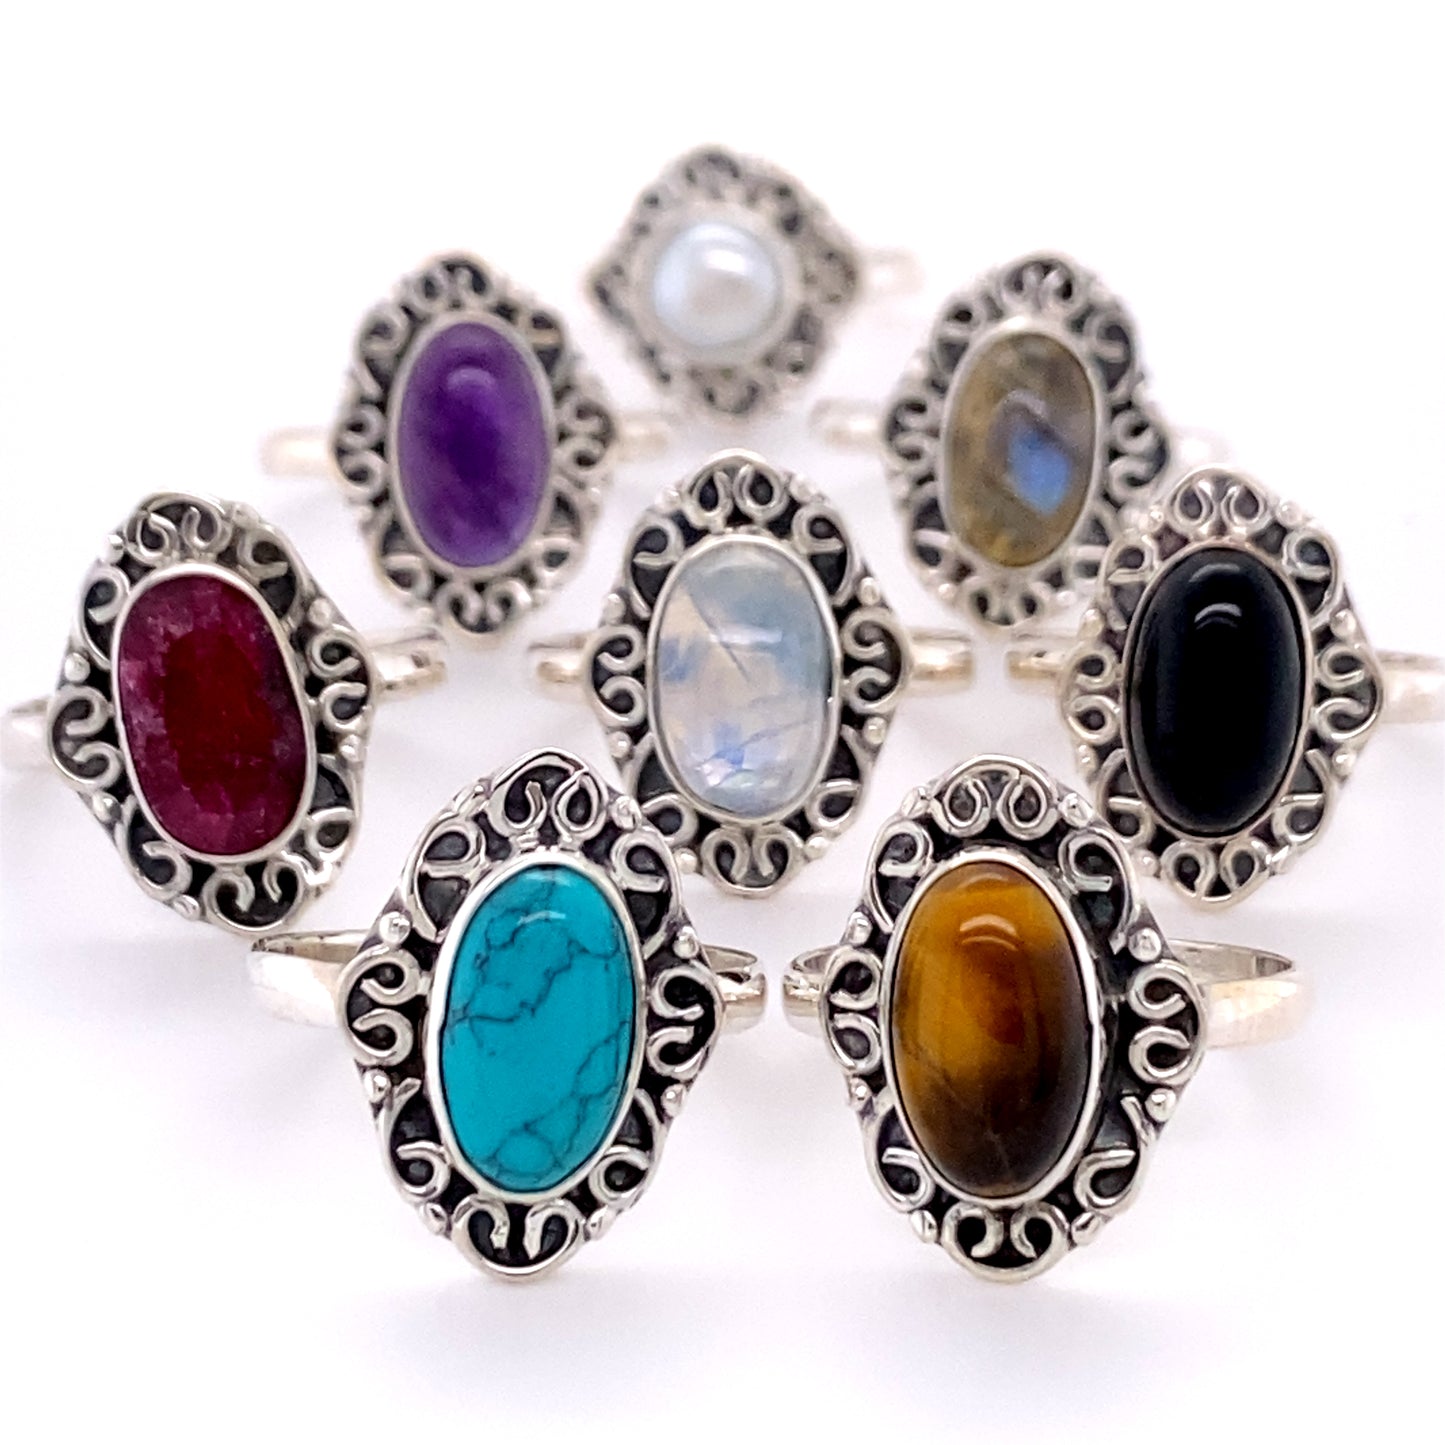 A collection of Oval Gemstone Rings with Swirl Filigree Border.